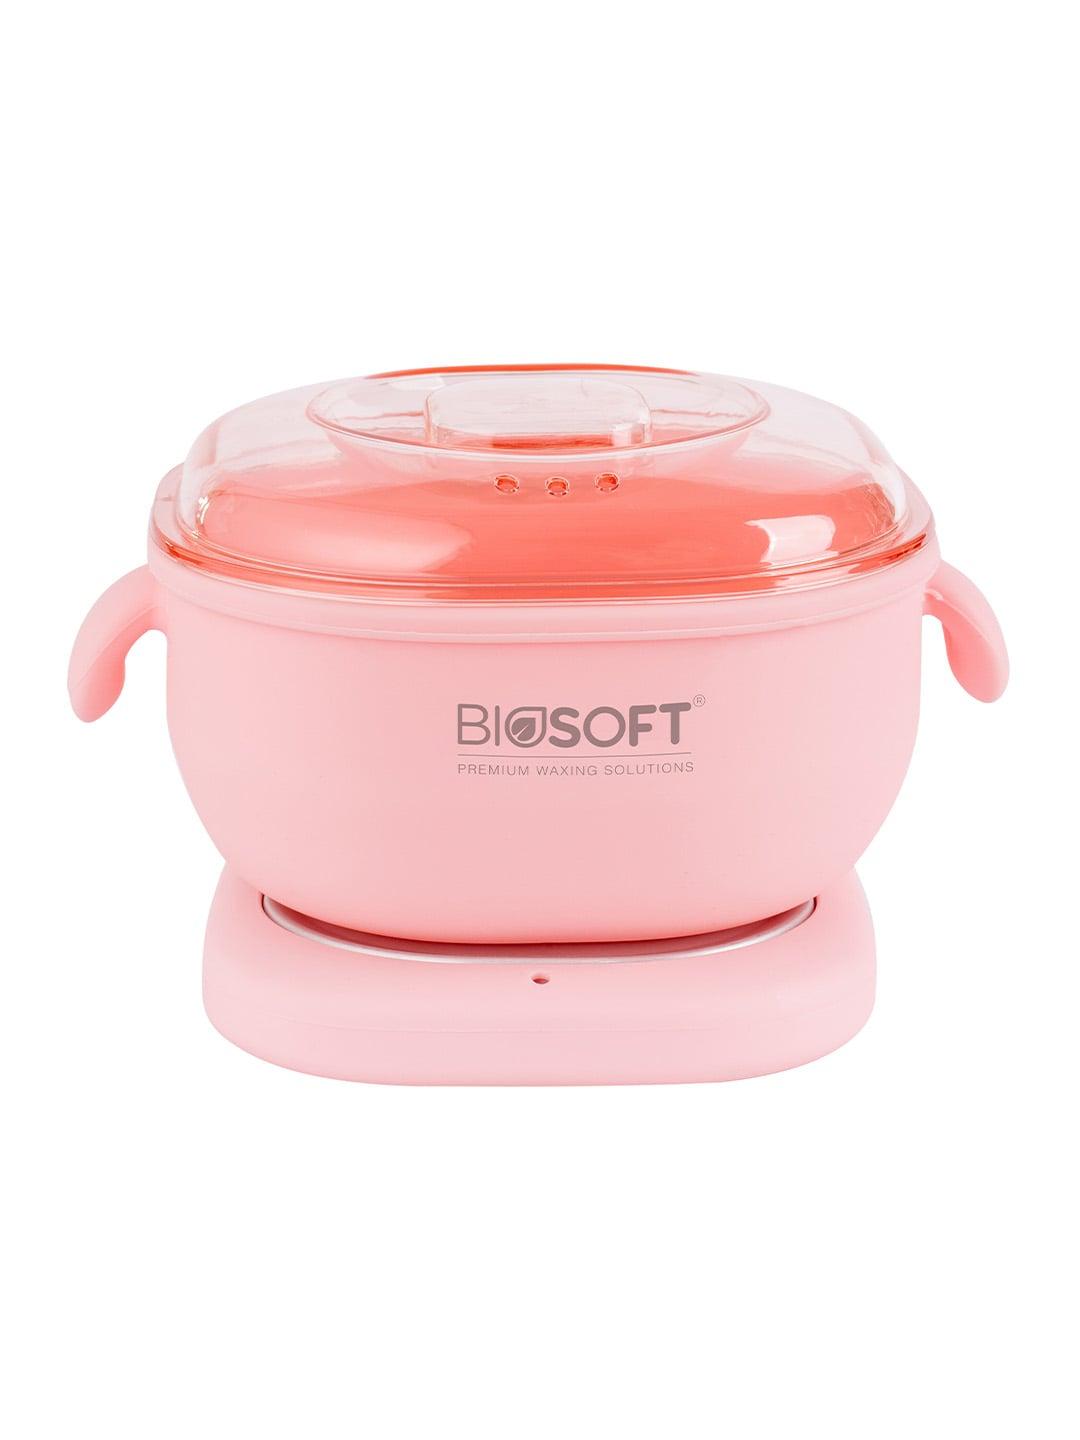 Biosoft Heat Resistant Collapsible Foldable Wax Heater - Pink